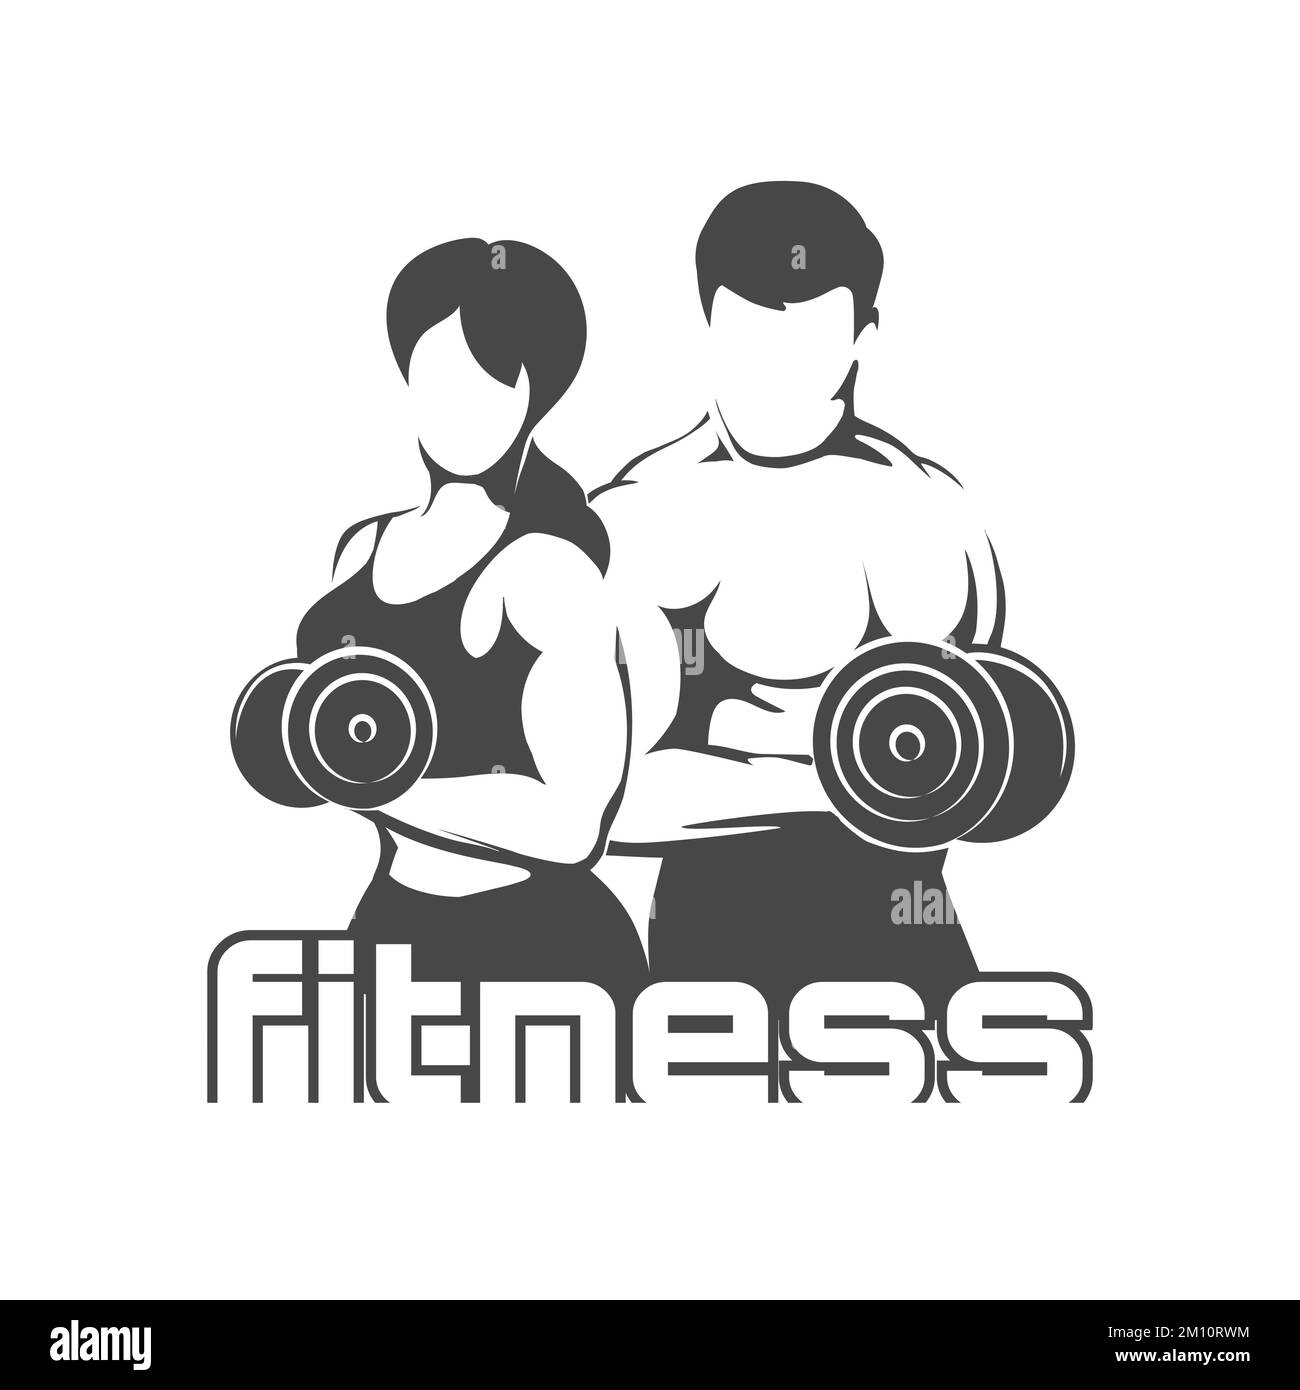 Fitness Logo with Training Bodybuilders. Man and Woman holds Dumbbells Isolated on White Stock Vector